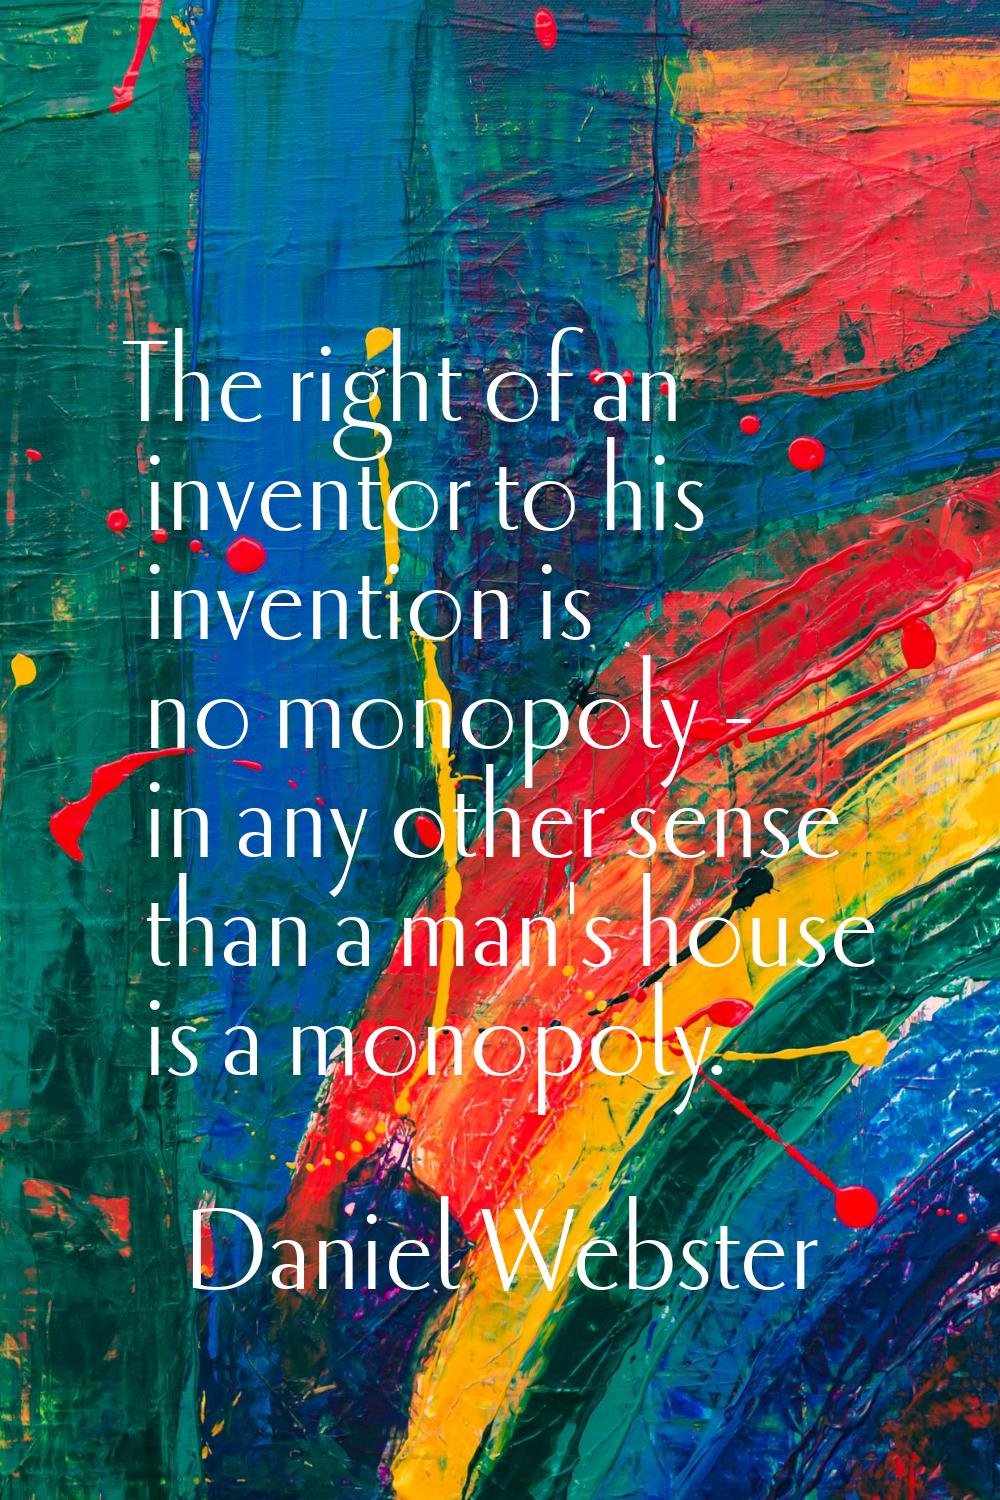 The right of an inventor to his invention is no monopoly - in any other sense than a man's house is